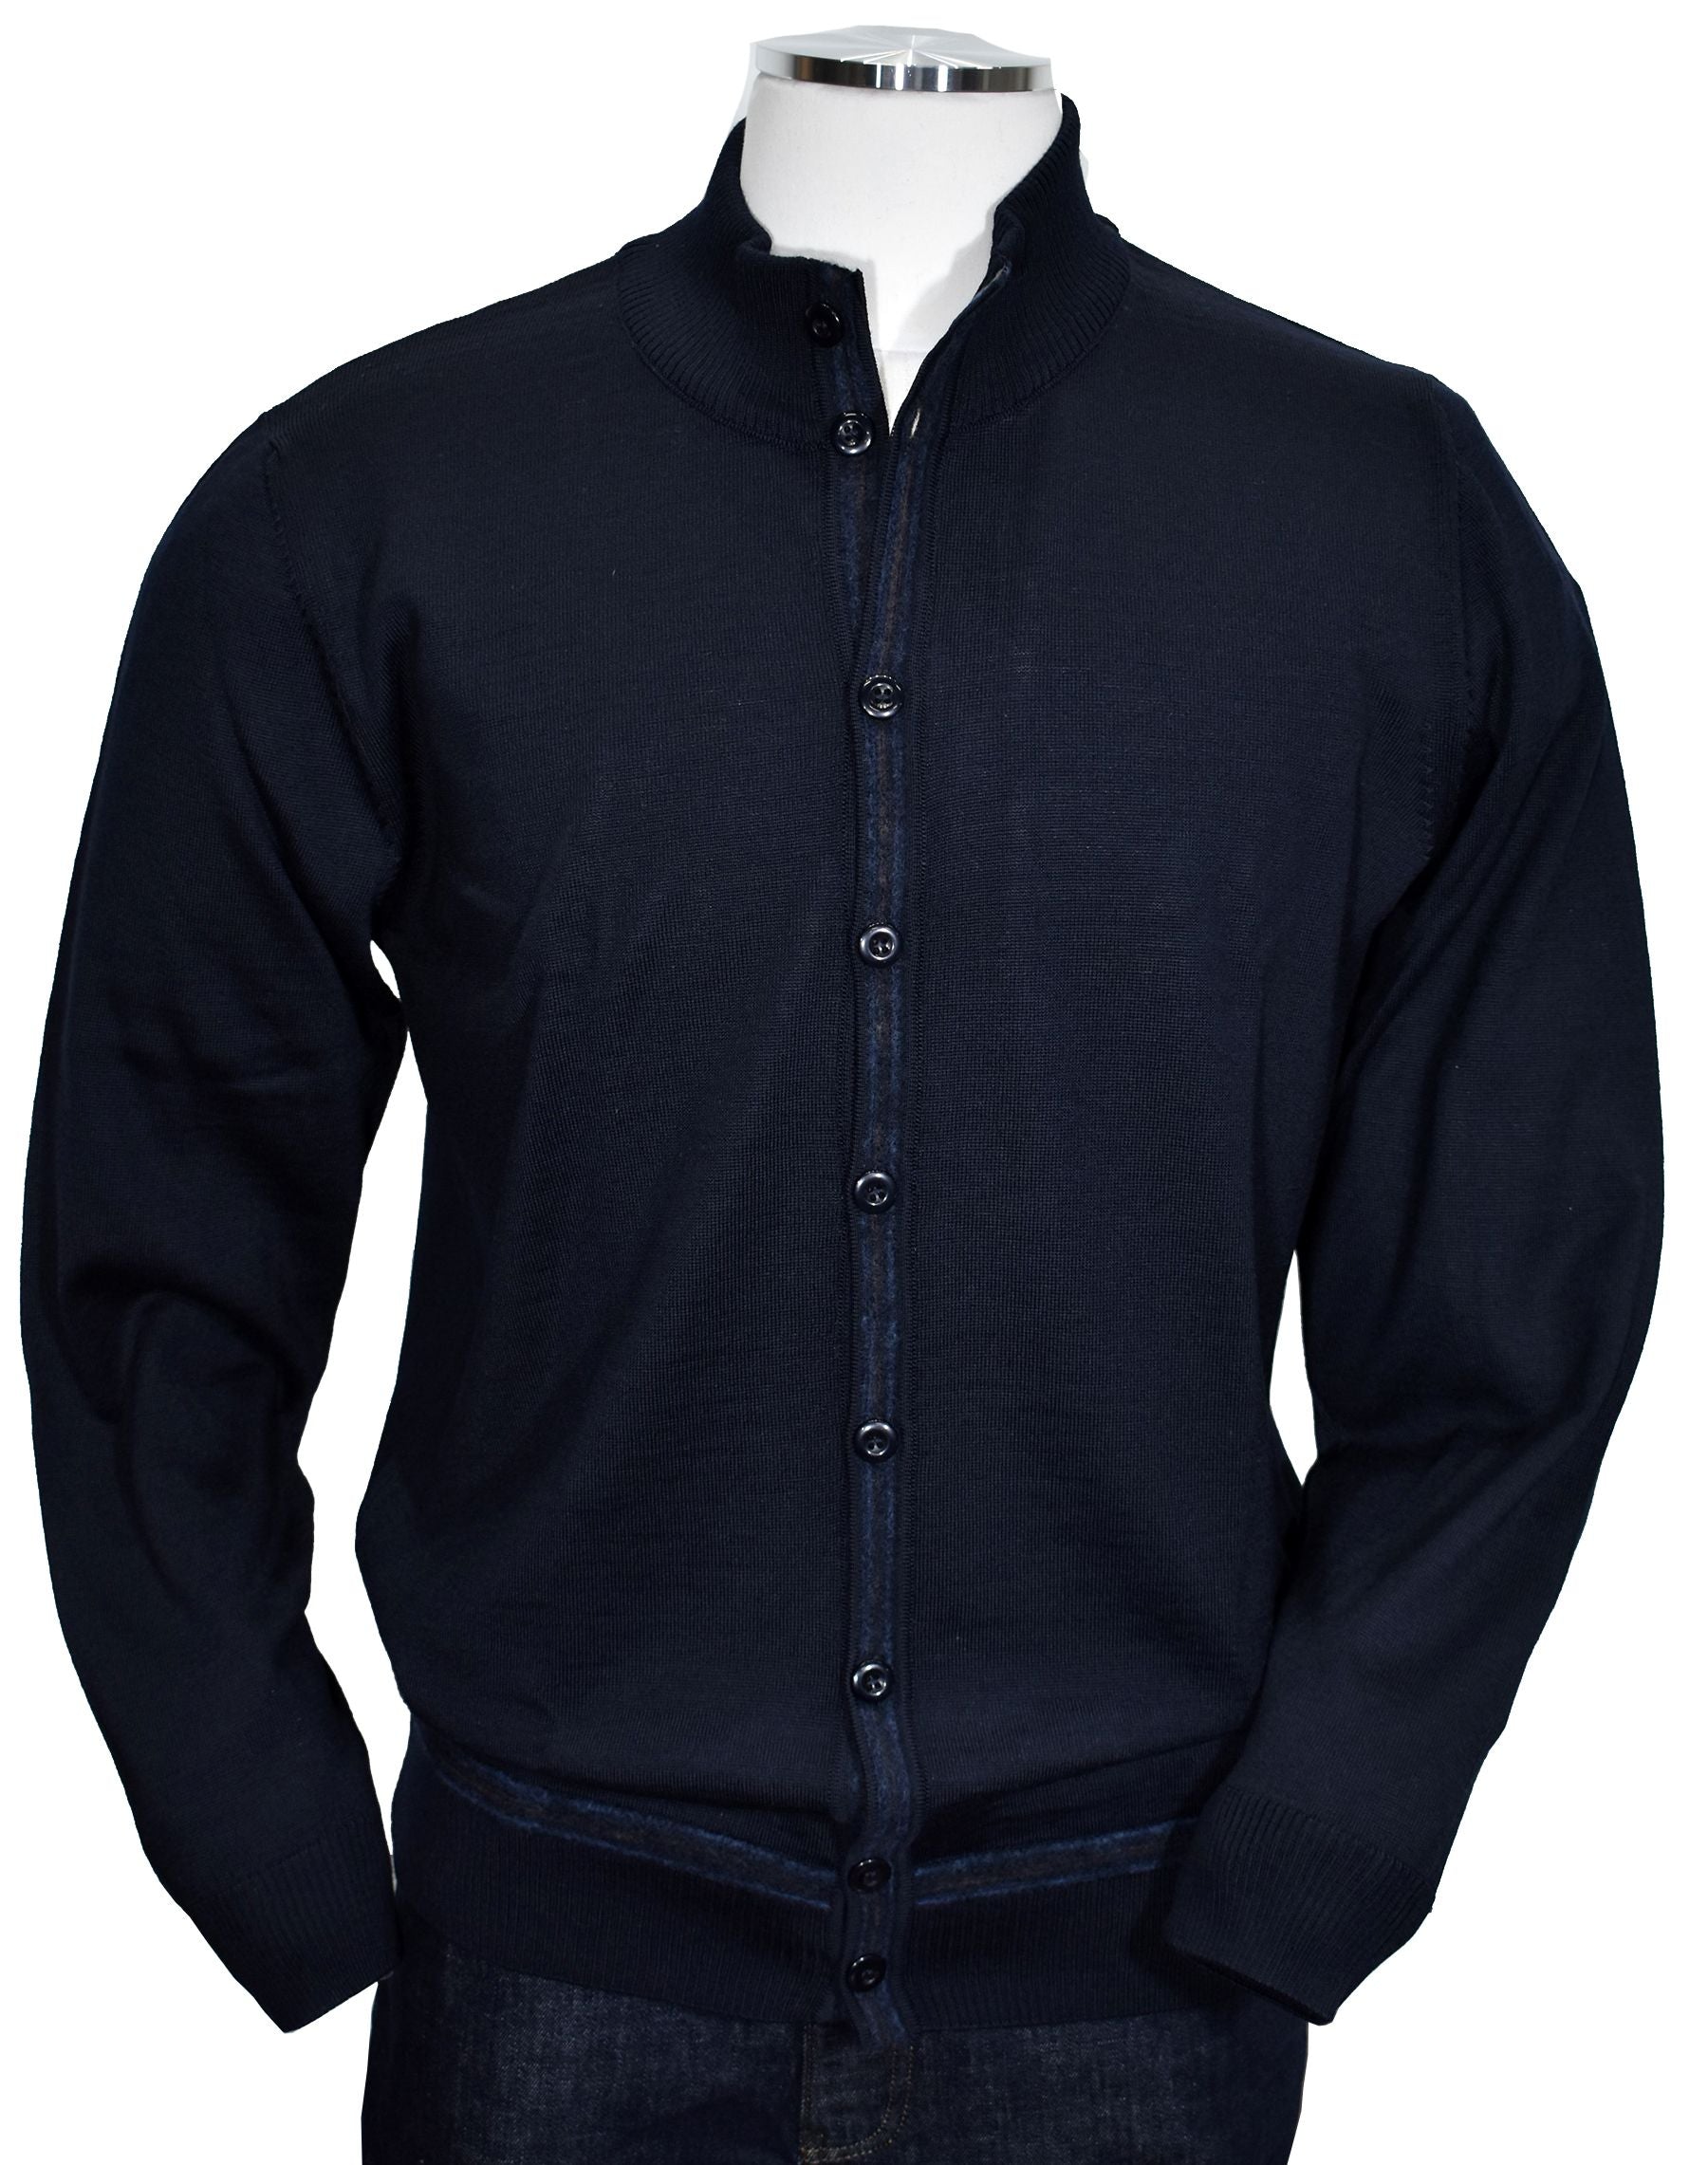 Finely knitted Italian merino wool blend in a classic cardigan model with a mock neck collar for a youthful style.   Accent stitch detailing along the buttons and bottom add a contemporary style to this navy colored sweater.   Soft and light weight Italian merino wool blended yarn for added comfort.  Classic fit. By Marcello Sport.